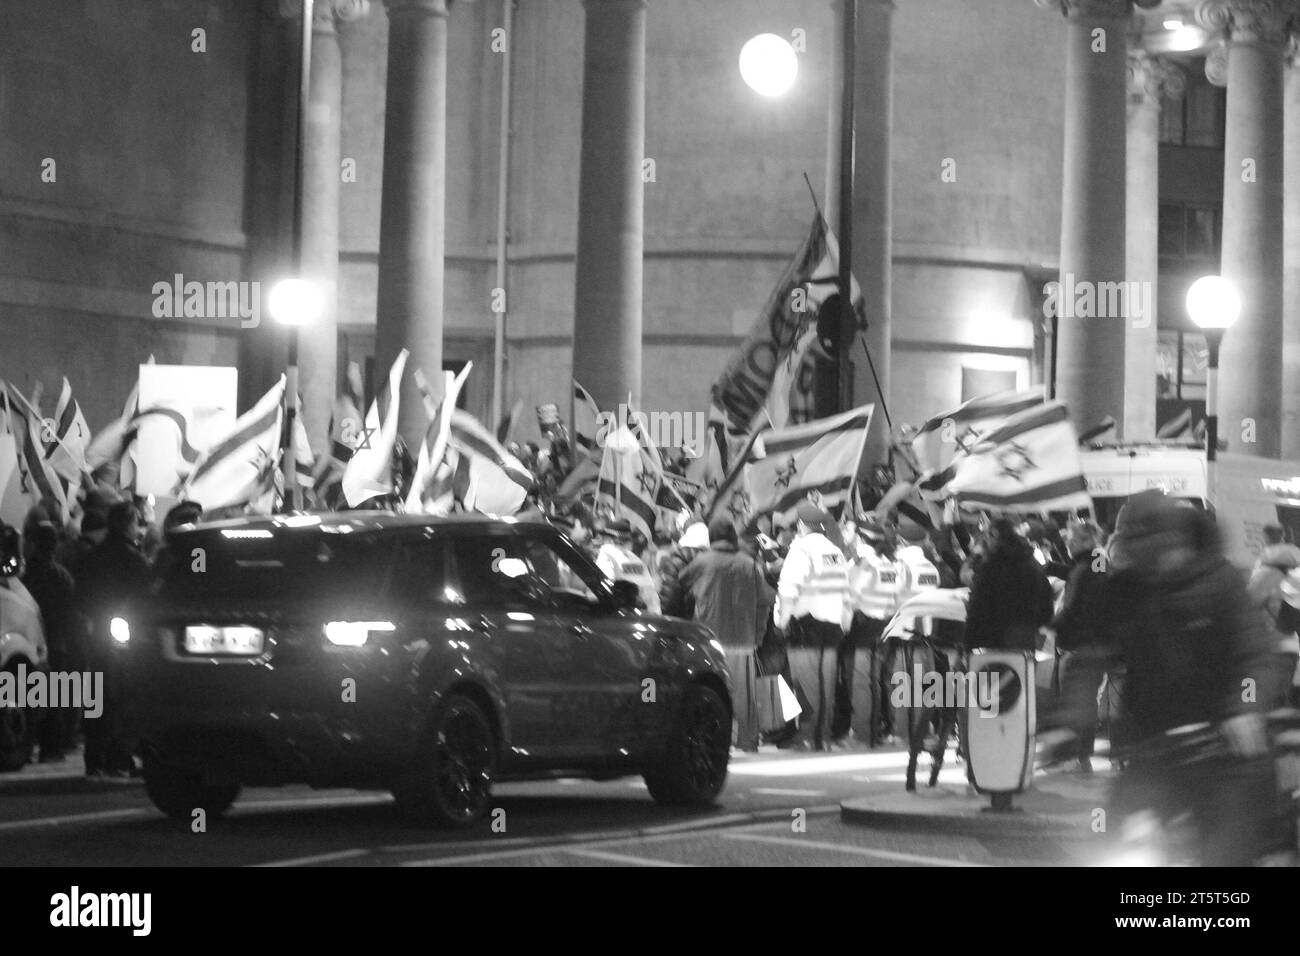 Big pro Israel demonstration outside the BBC . A lot of flags and a lot of people shouting against the bbc and Hamas. The police was present in force as well 16/10/2023 blitz pictures Stock Photo